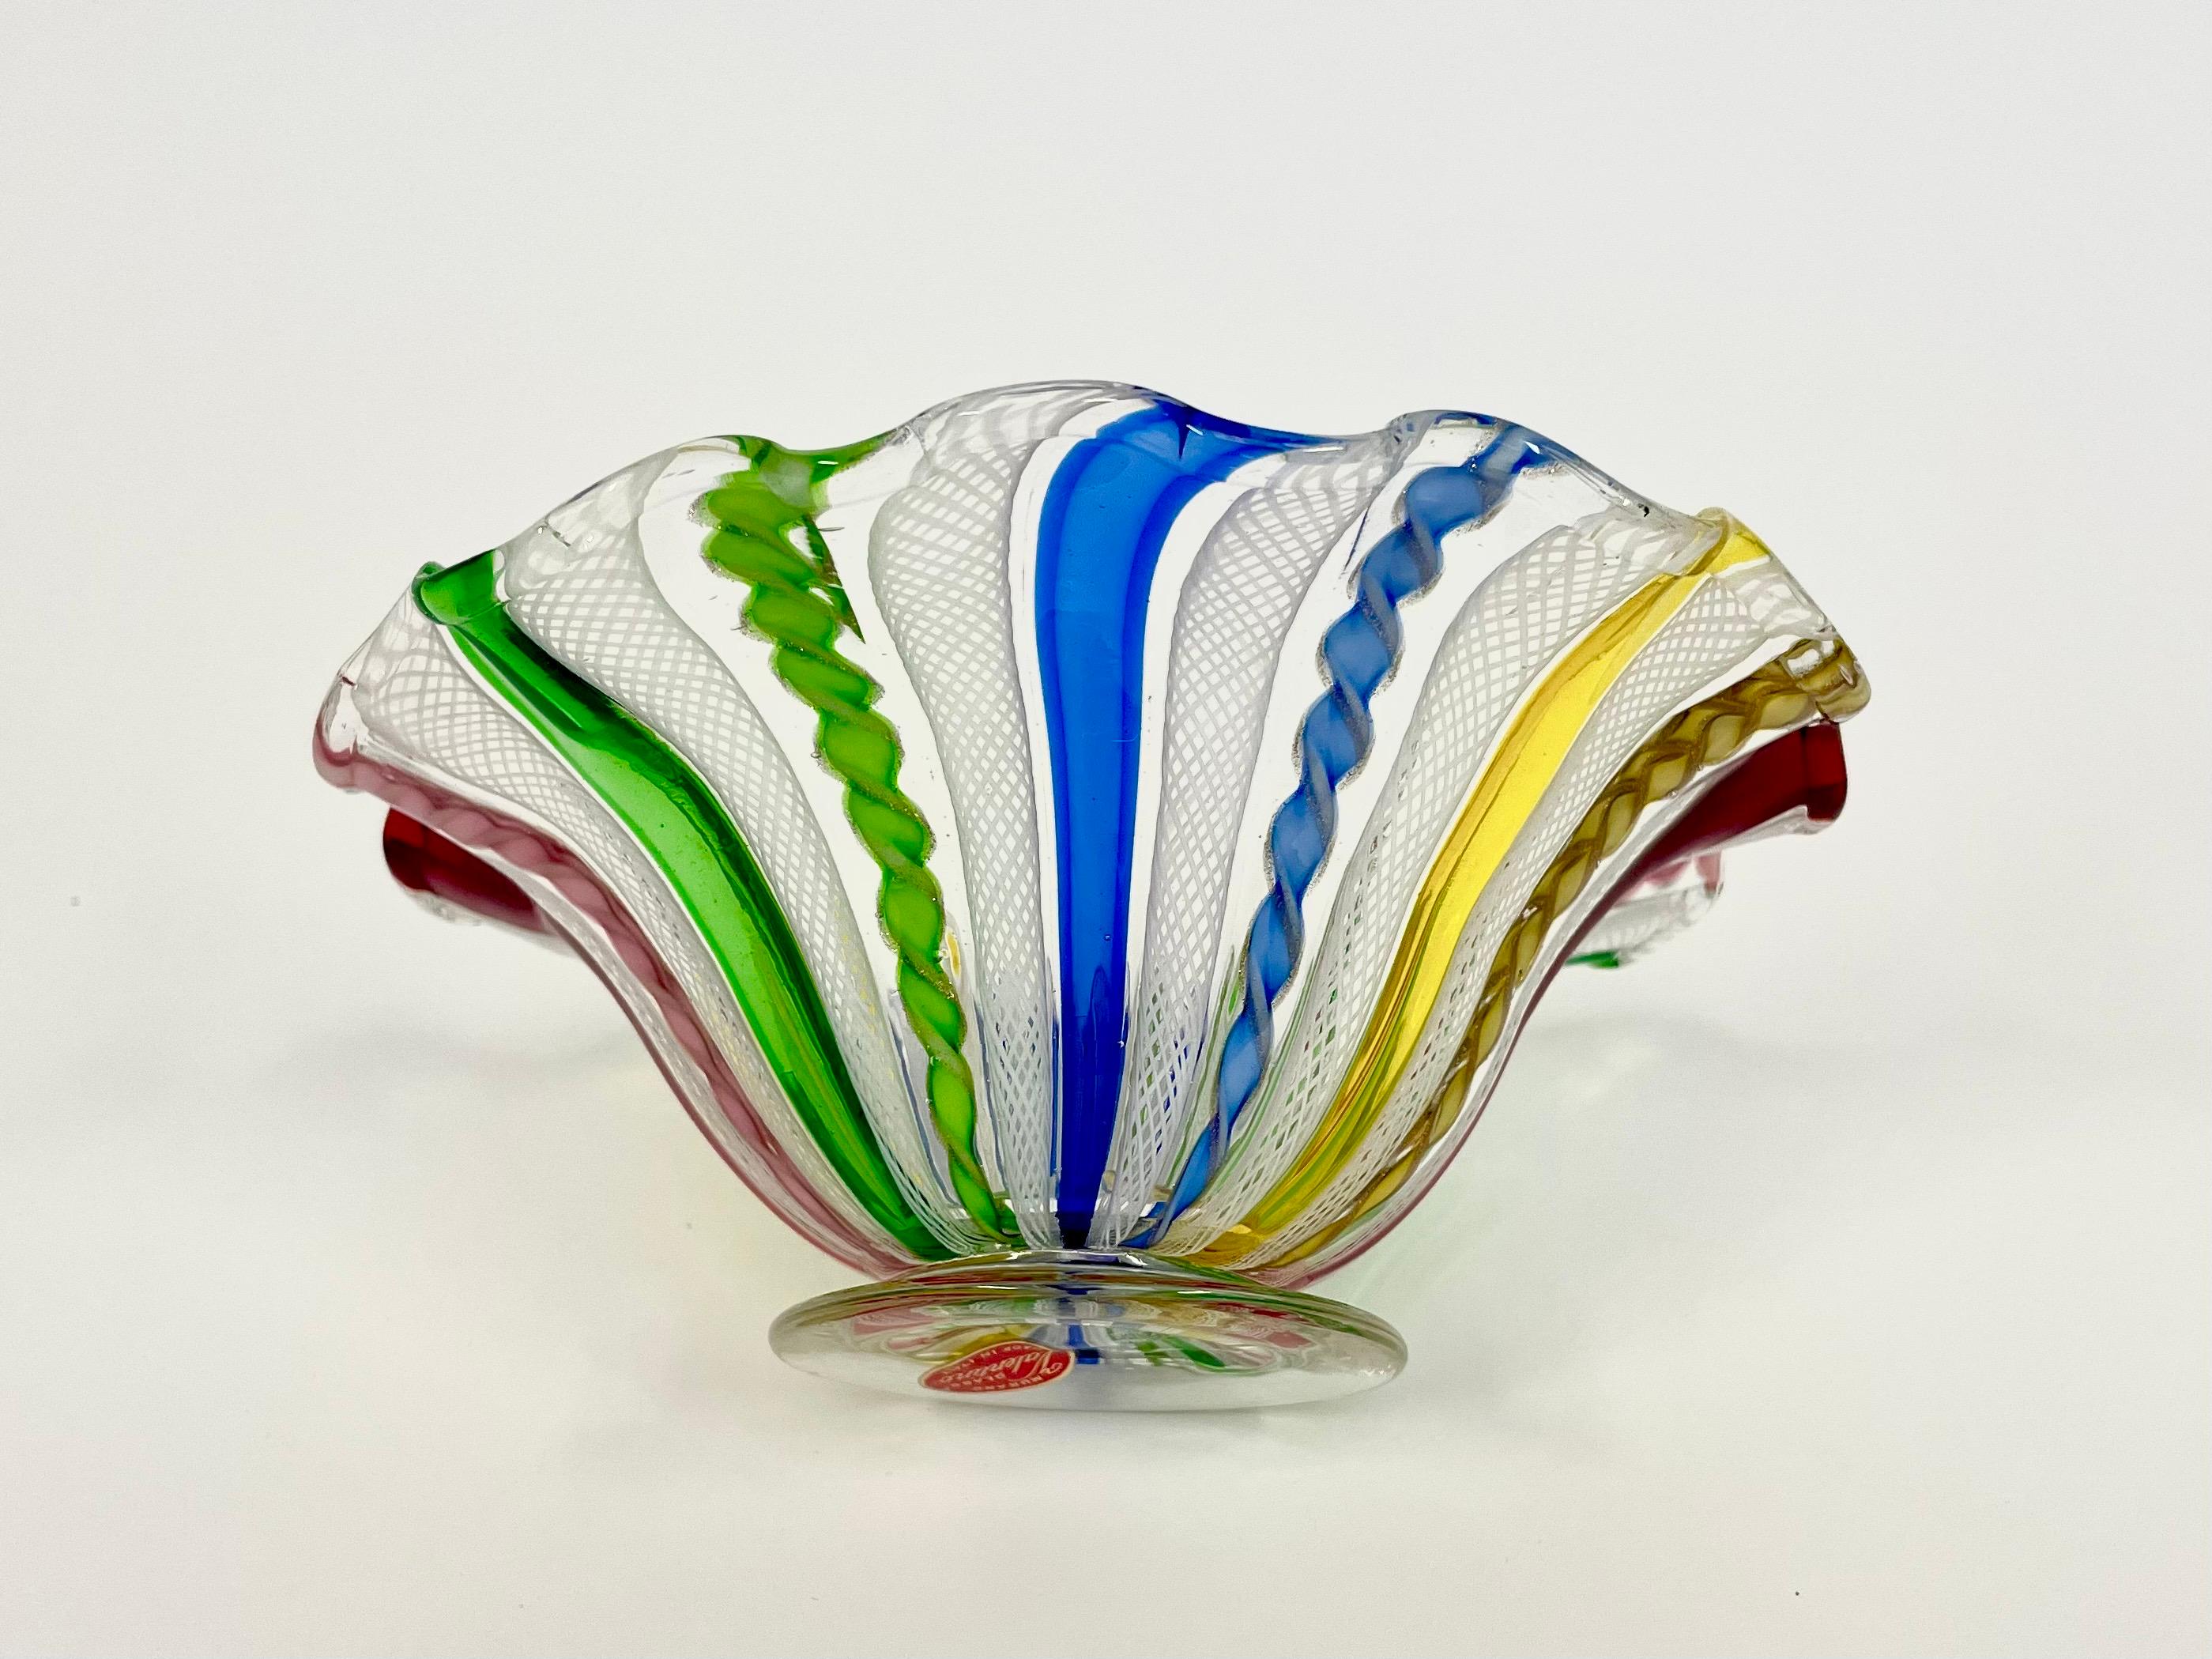 Italian 1950s Salviati Murano Footed Glass Bowl with Rainbow Colored Decor For Sale 1